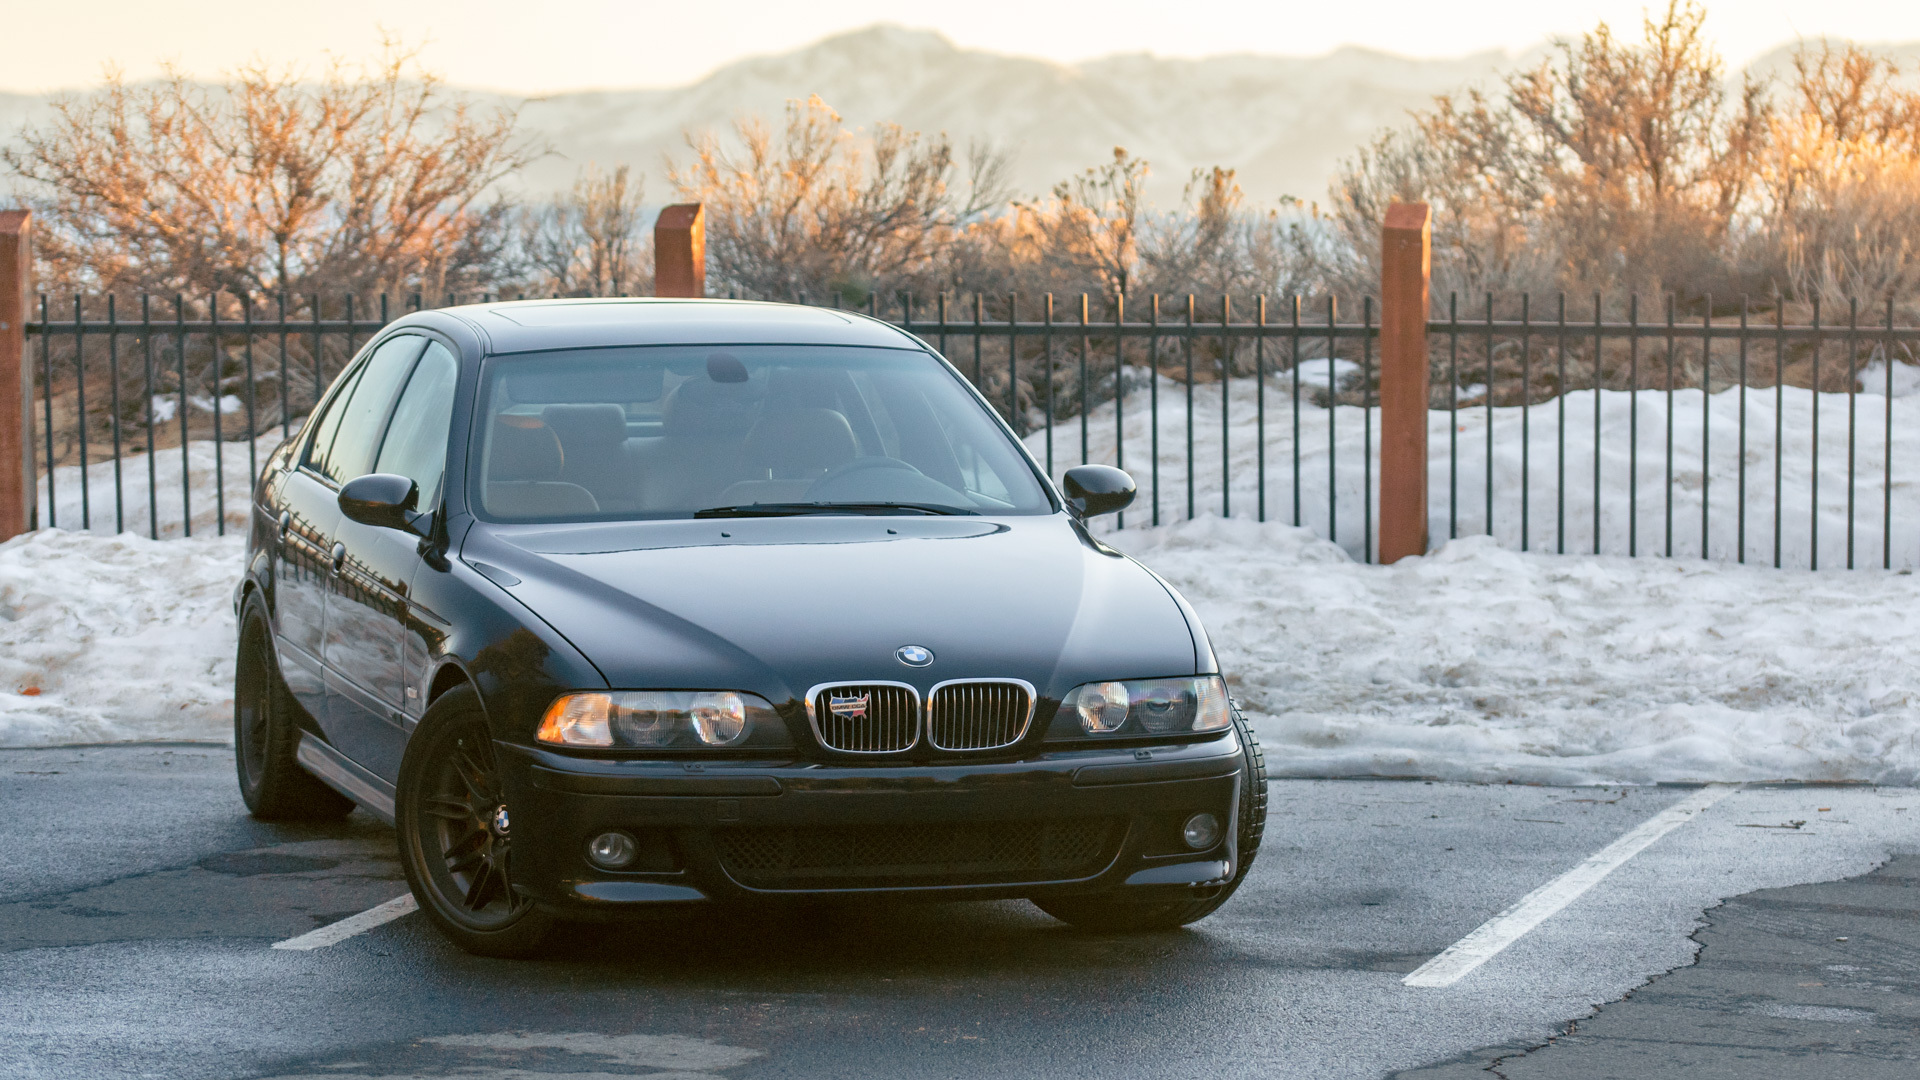 BMW E39 M5 Brought Back To Life With First Wash In A Decade